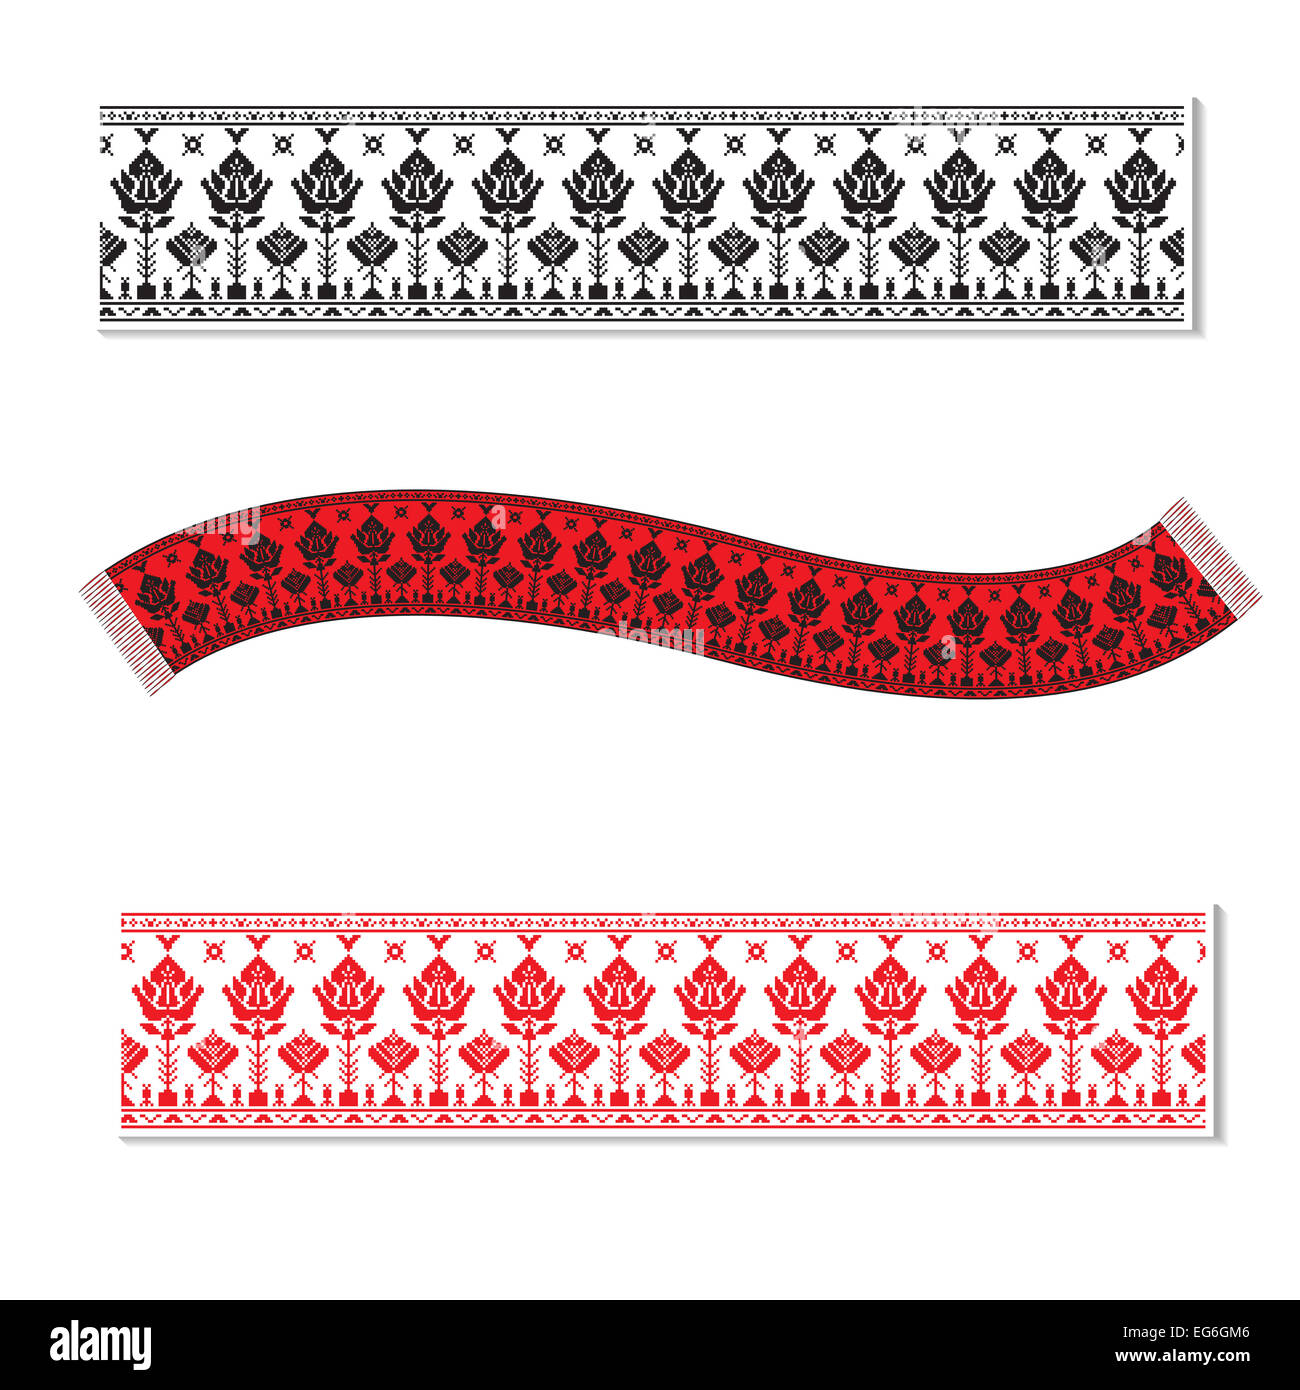 Belorussian ethnic ornament. Vector illustration. From collection of Balto-Slavic ornaments Stock Photo